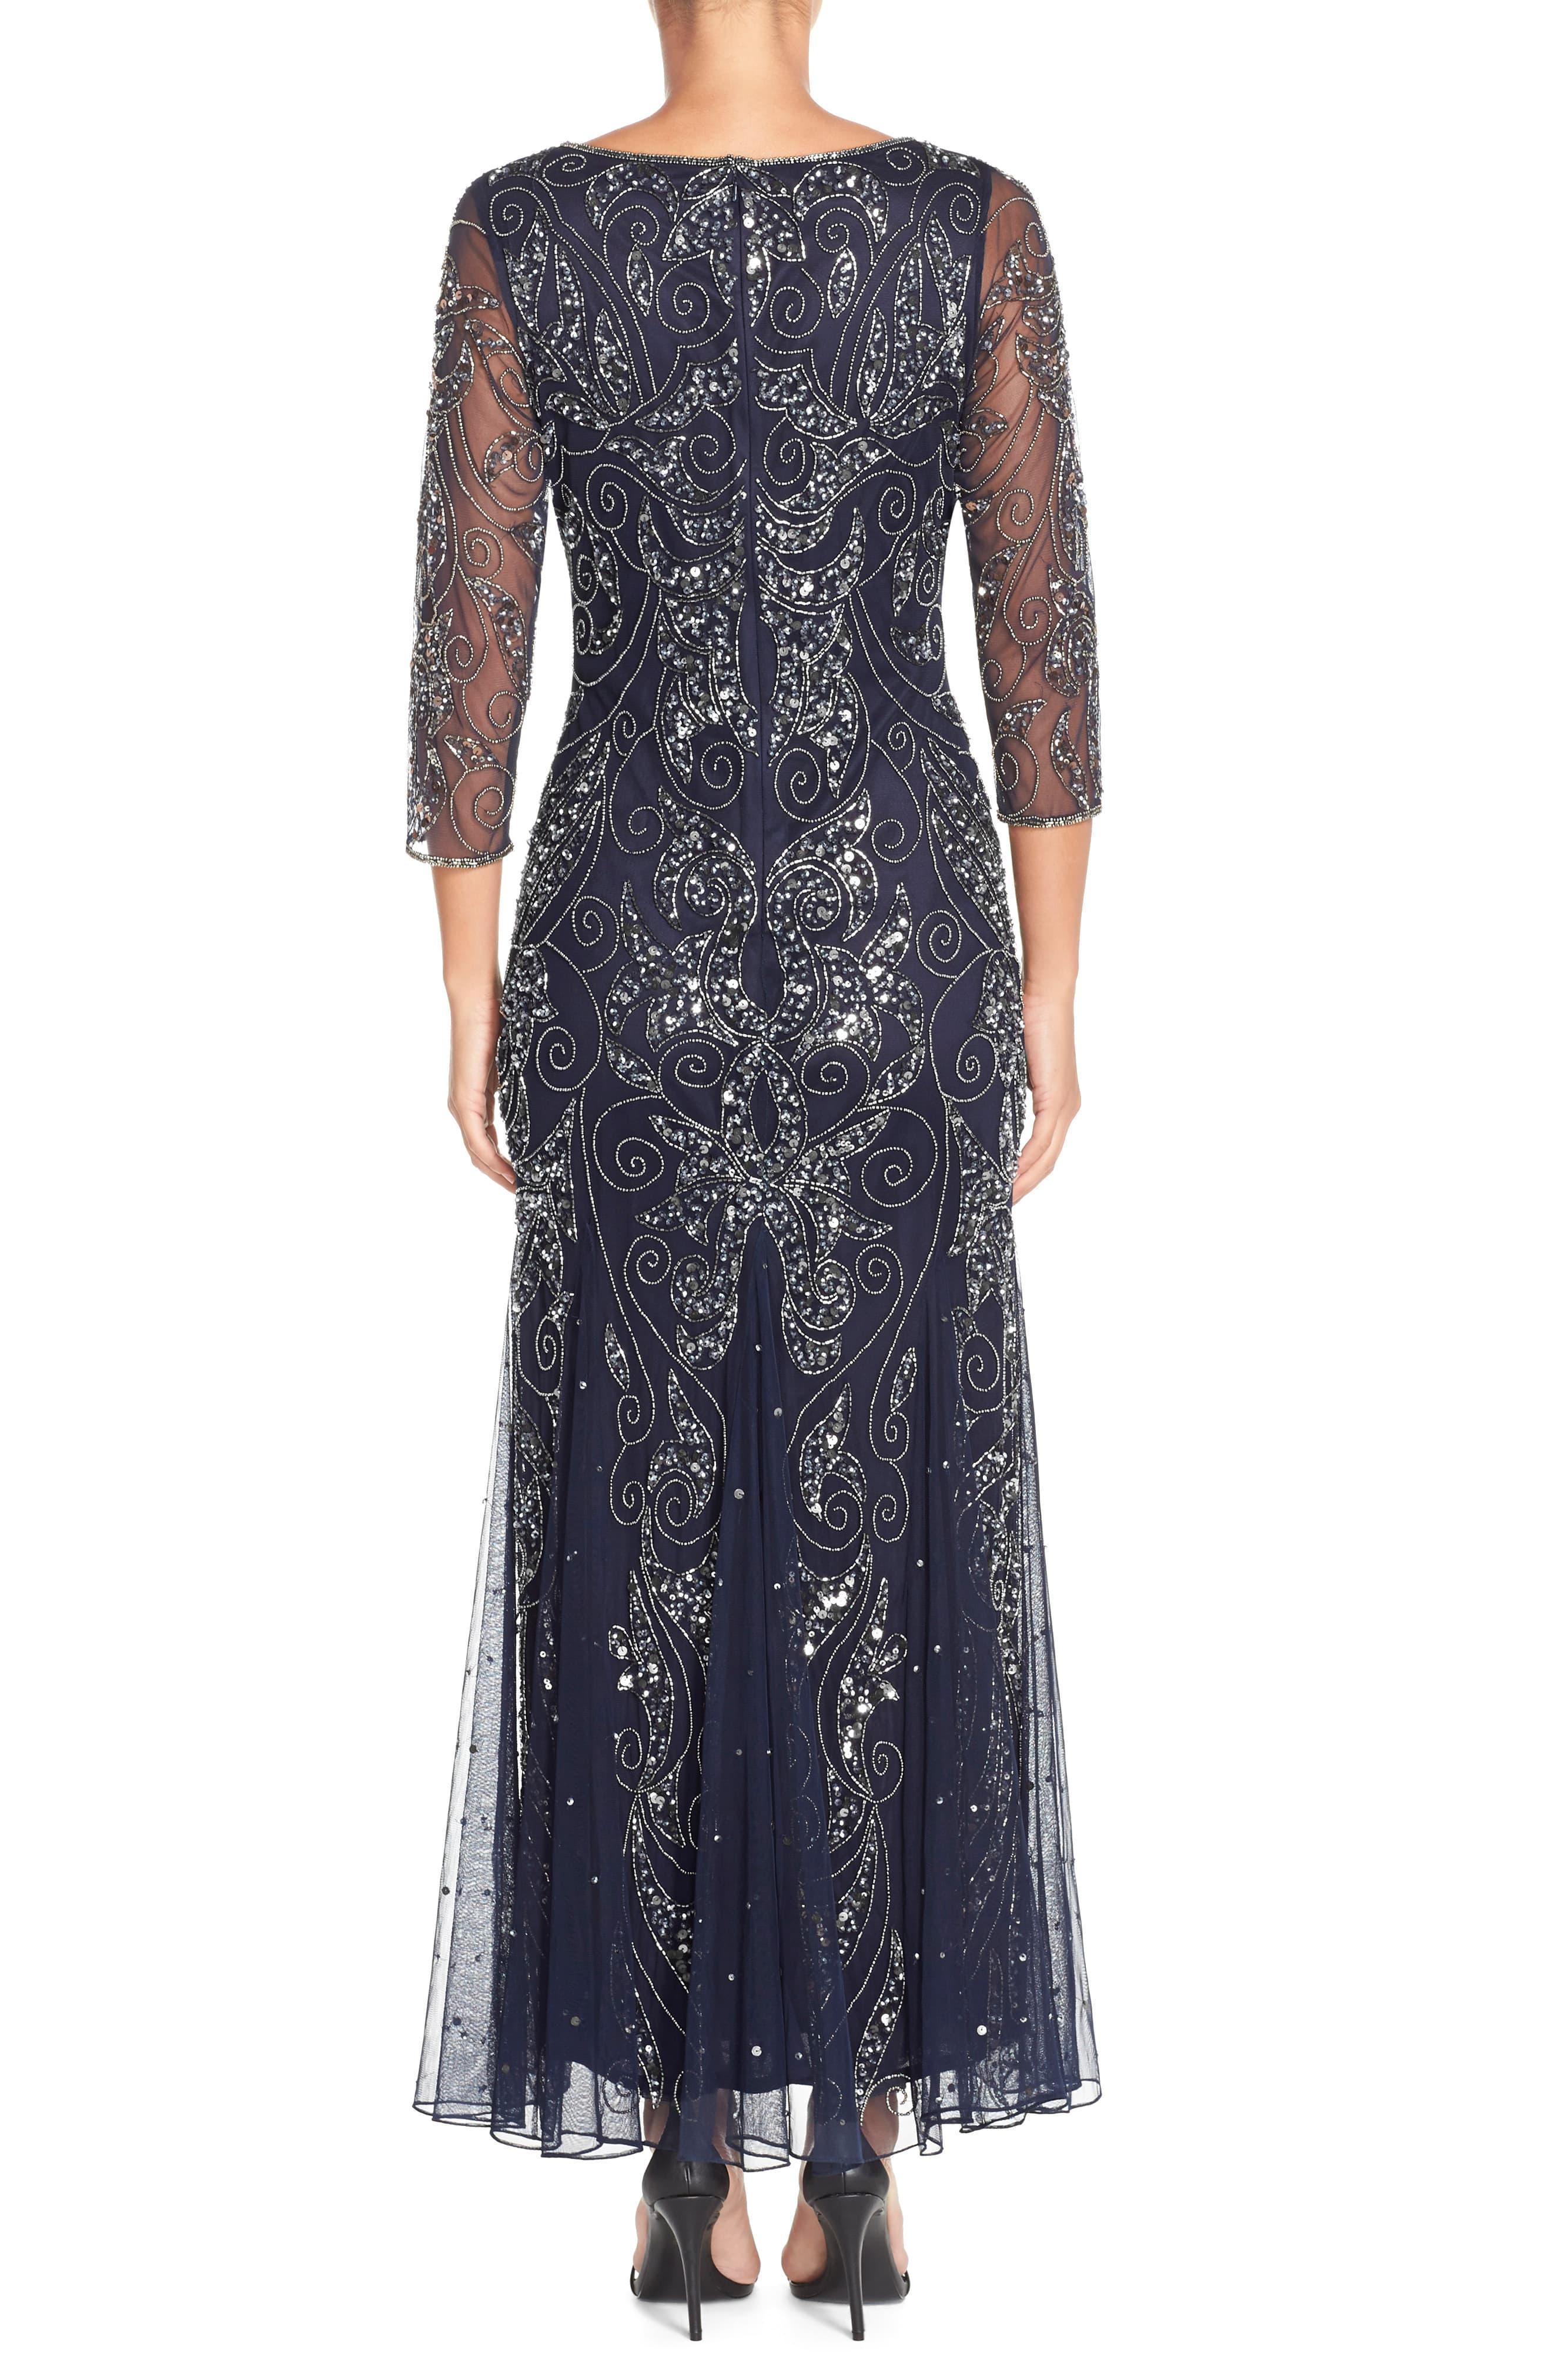 Pisarro Nights Embellished Mesh Gown in Navy (Blue) - Lyst